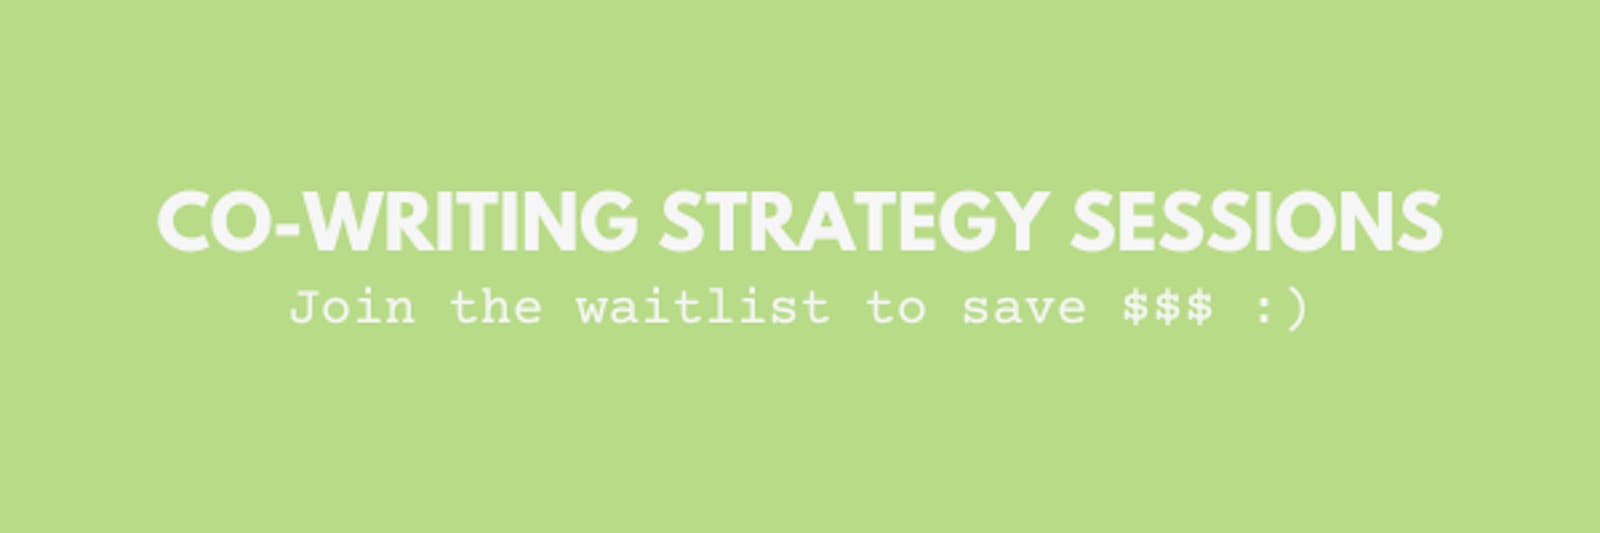 WAITLIST Co-Writing Strategy Sessions!